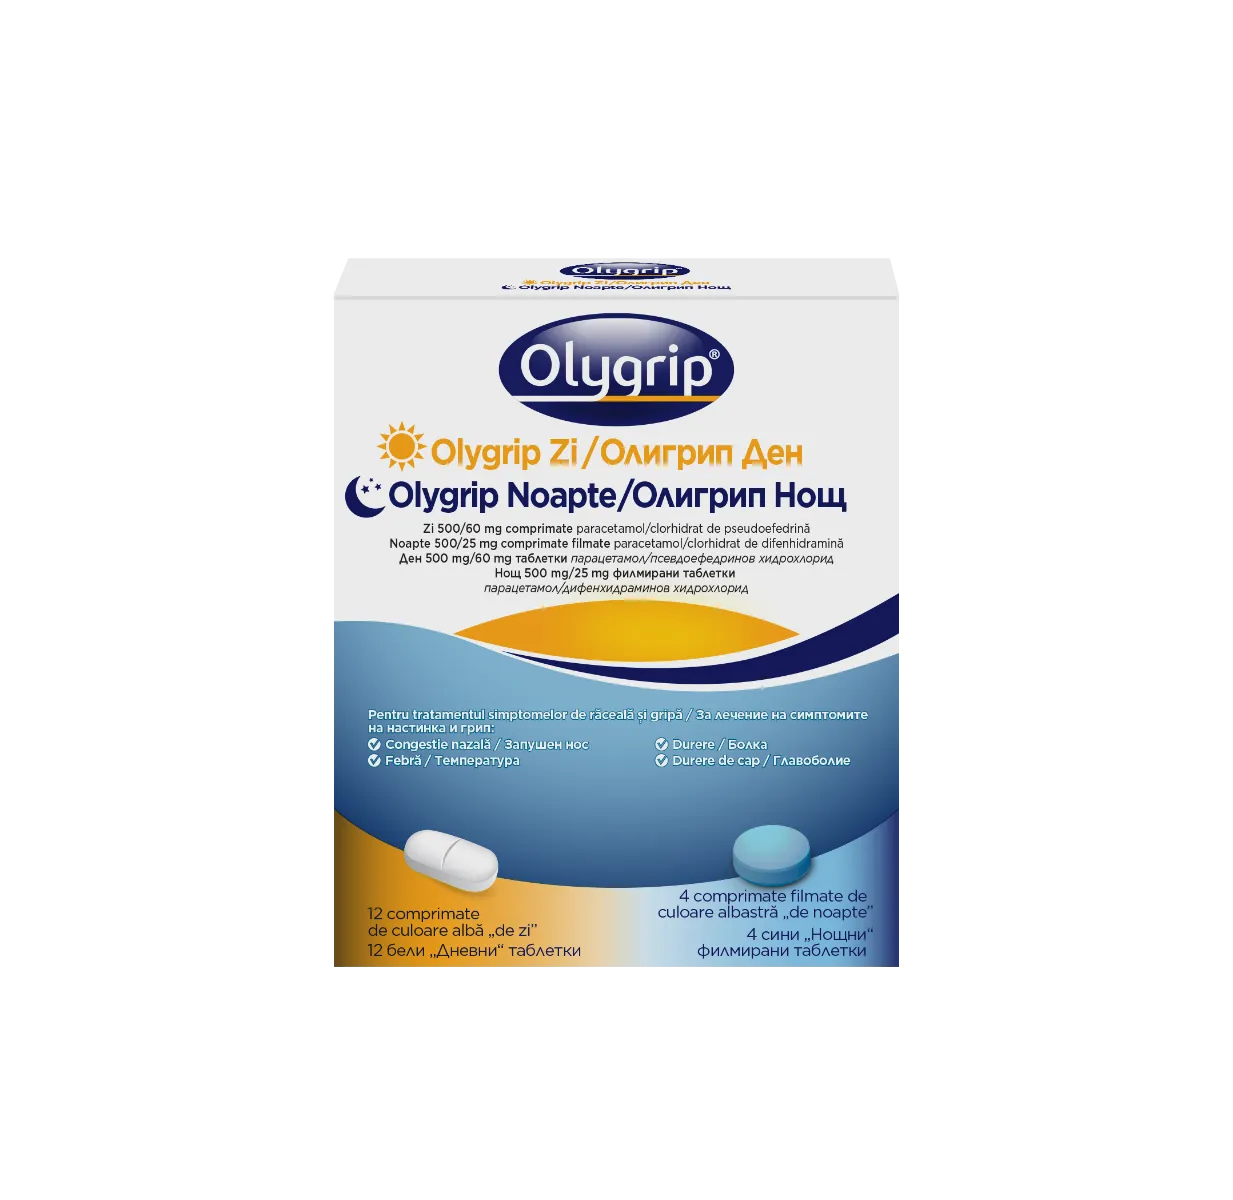 Olygrip Zi 500/60mg + Olygrip Noapte 500/25mg, 12 comprimate + 4 comprimate filmate, McNeil Healthcare